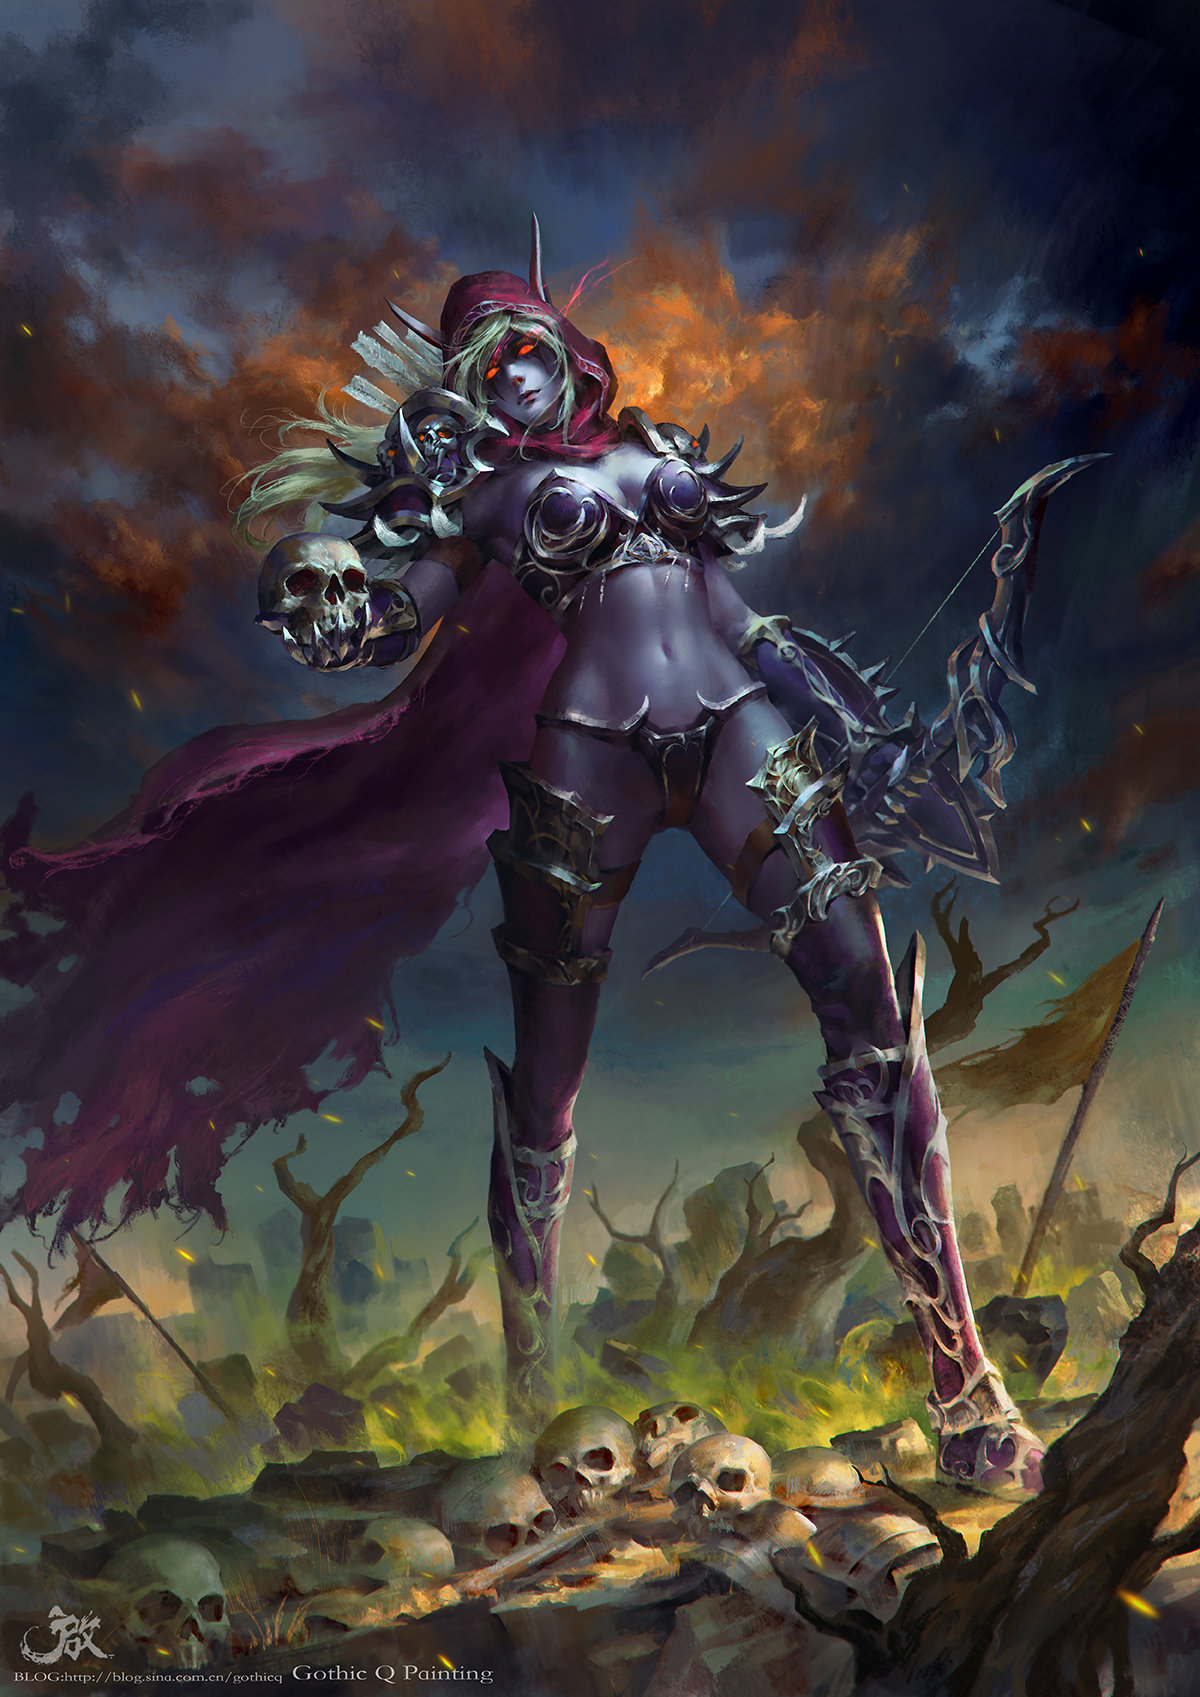 General 1200x1697 video games Sylvanas Windrunner World of Warcraft Archers skull armor portrait display women elves Forsaken (character) drawing PC gaming video game girls fantasy art fantasy girl belly glowing eyes red eyes video game art bow archer hoods cape long eyebrows